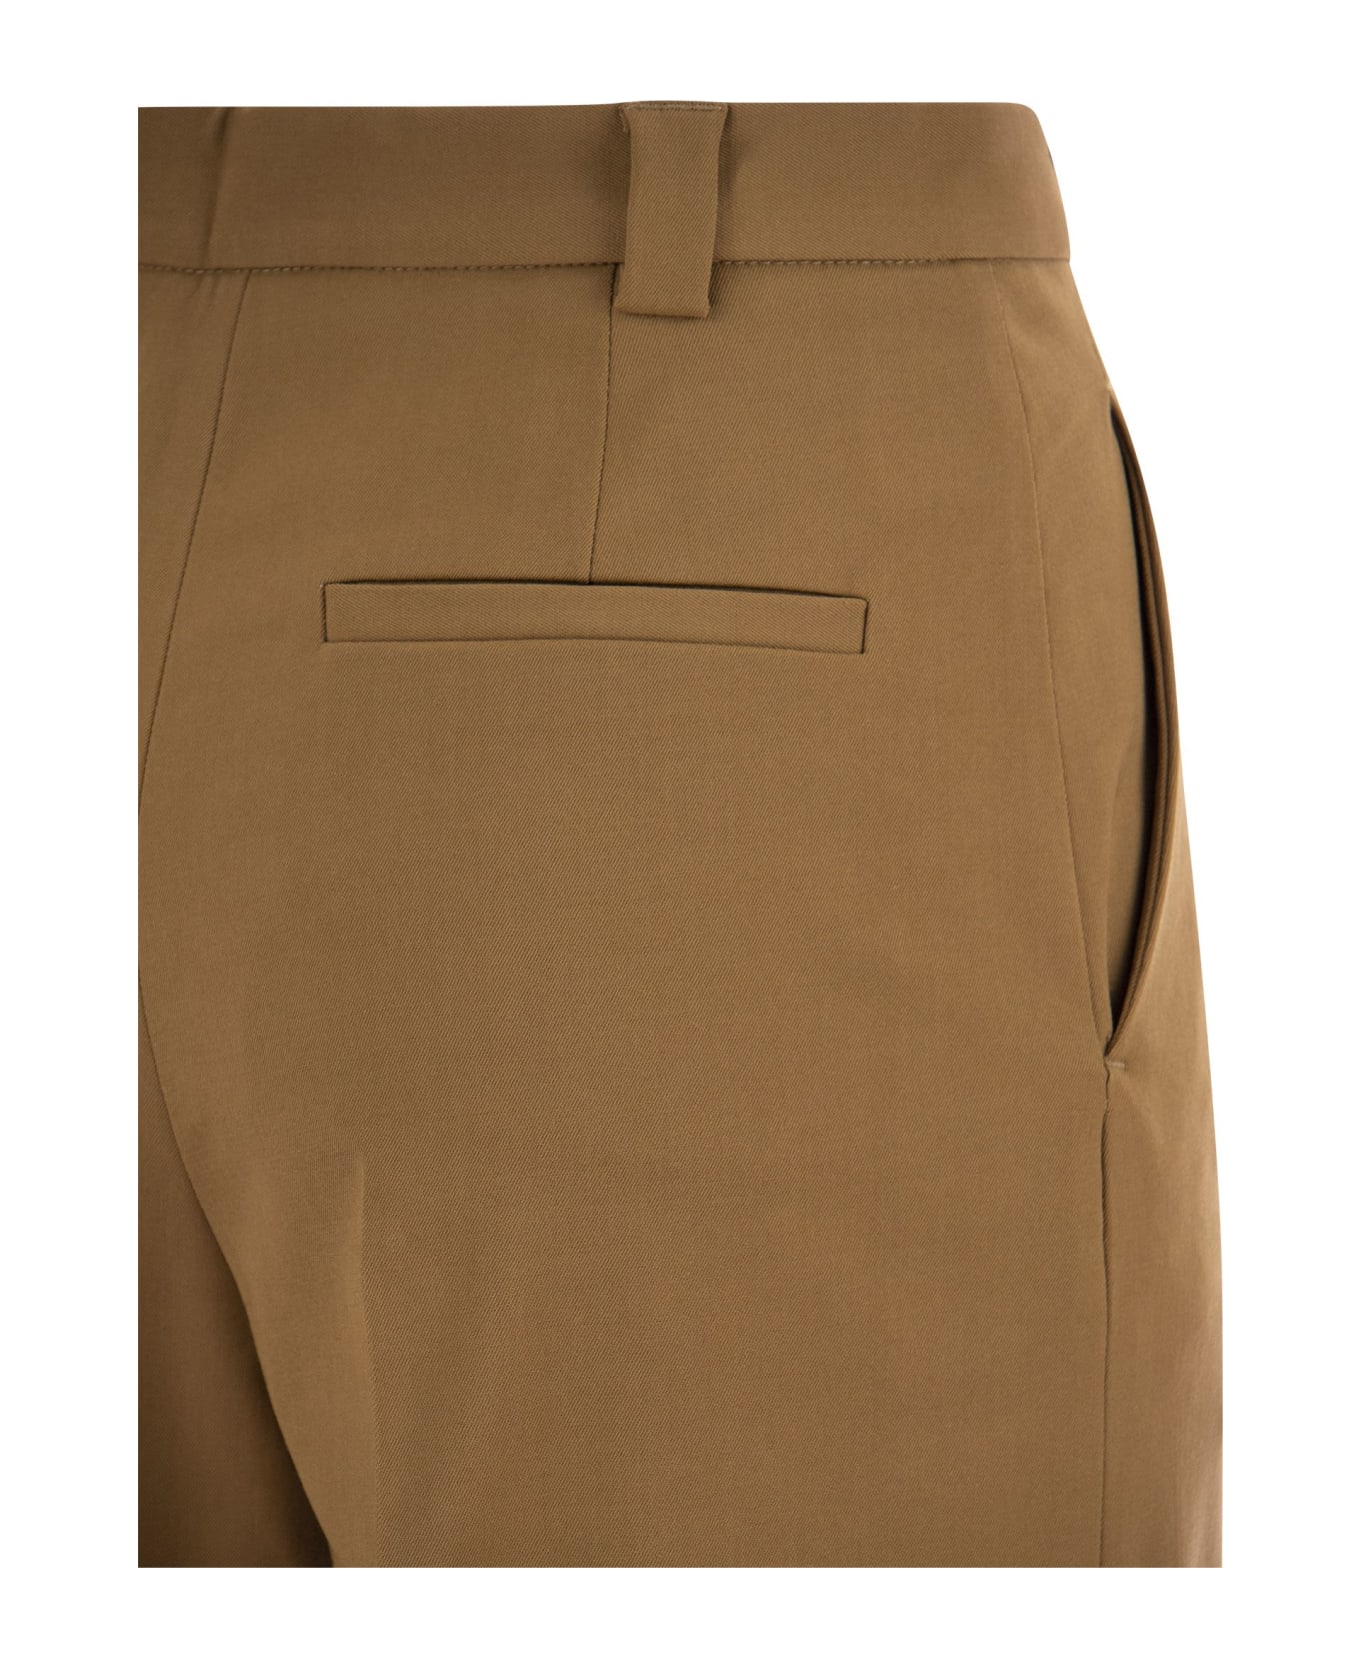 RED Valentino Wide Trousers In Viscose And Wool - Tobacco ボトムス